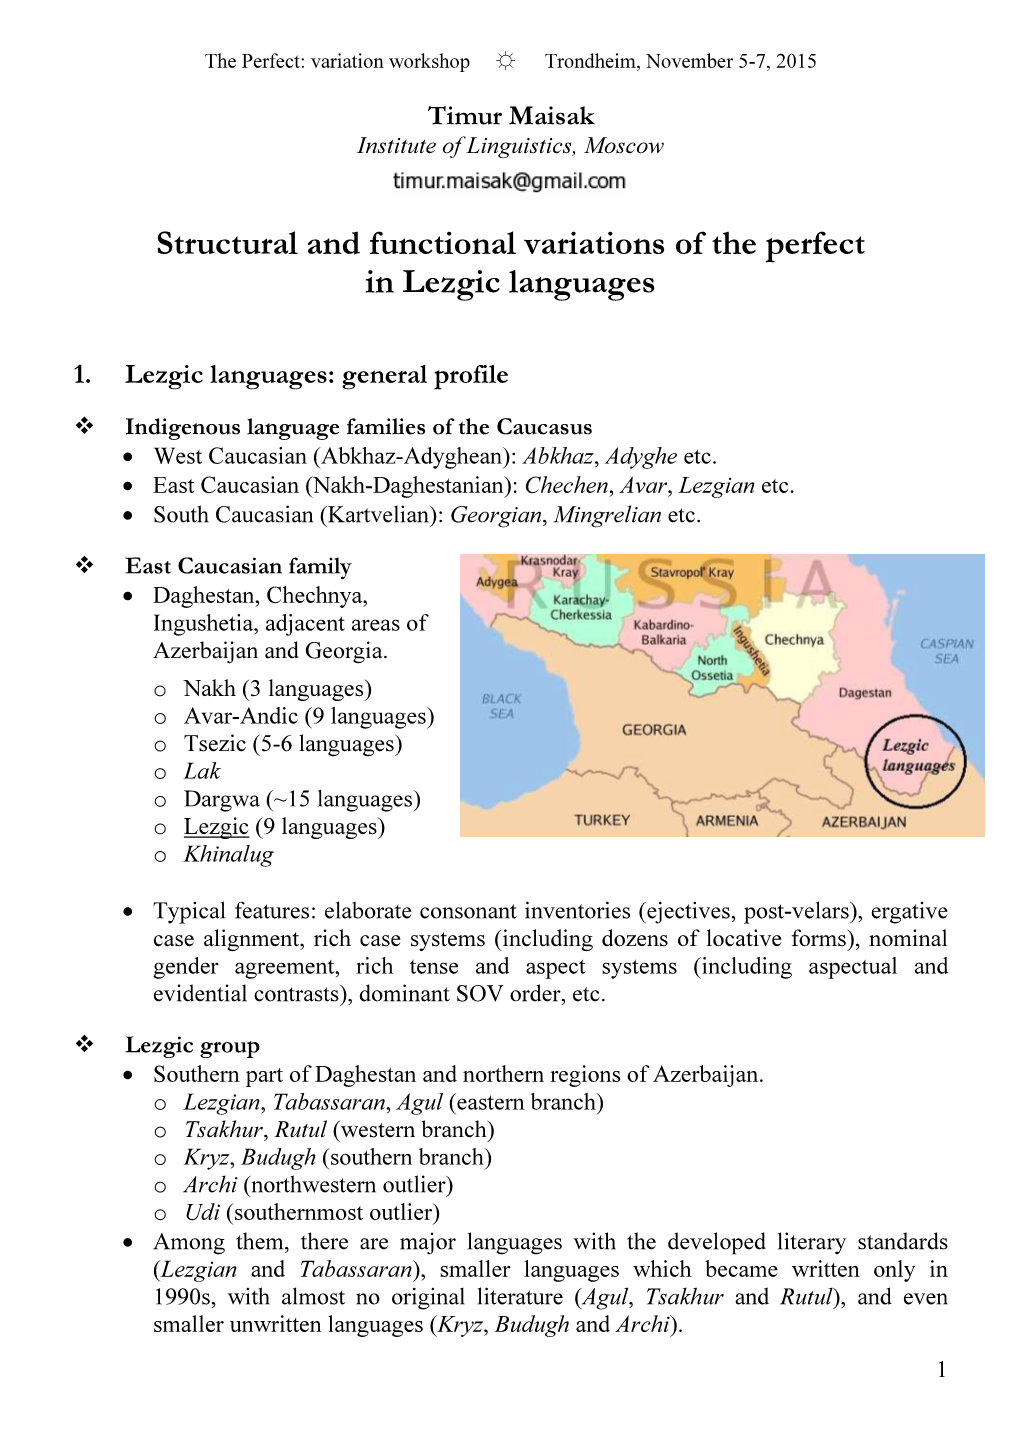 Structural and Functional Variations of the Perfect in Lezgic Languages